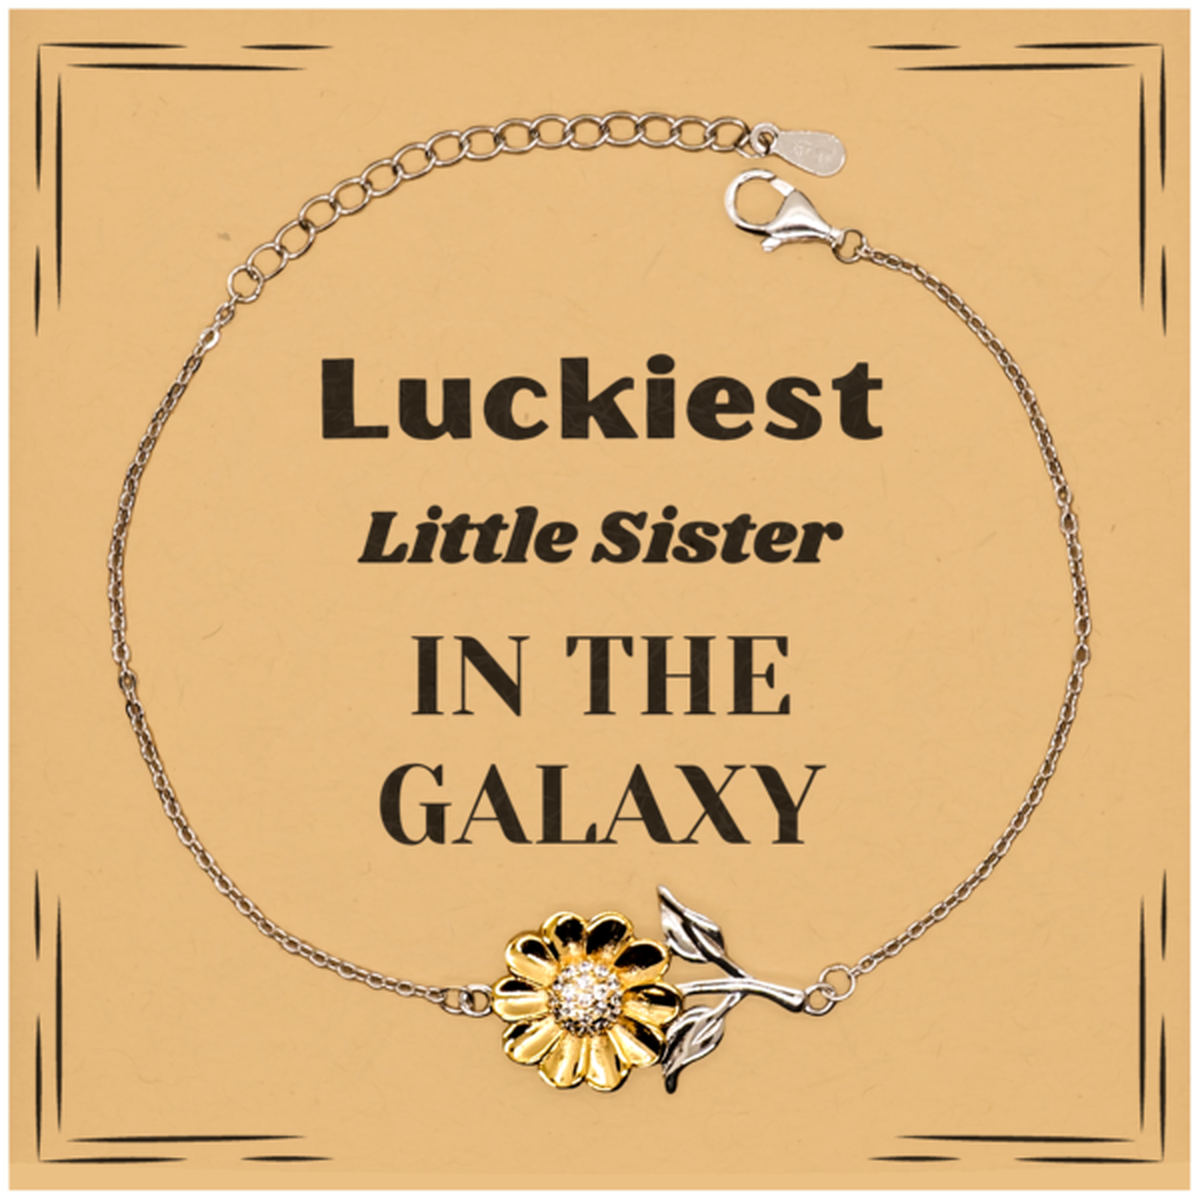 Luckiest Little Sister in the Galaxy, To My Little Sister Message Card Gifts, Christmas Little Sister Sunflower Bracelet Gifts, X-mas Birthday Unique Gifts For Little Sister Men Women